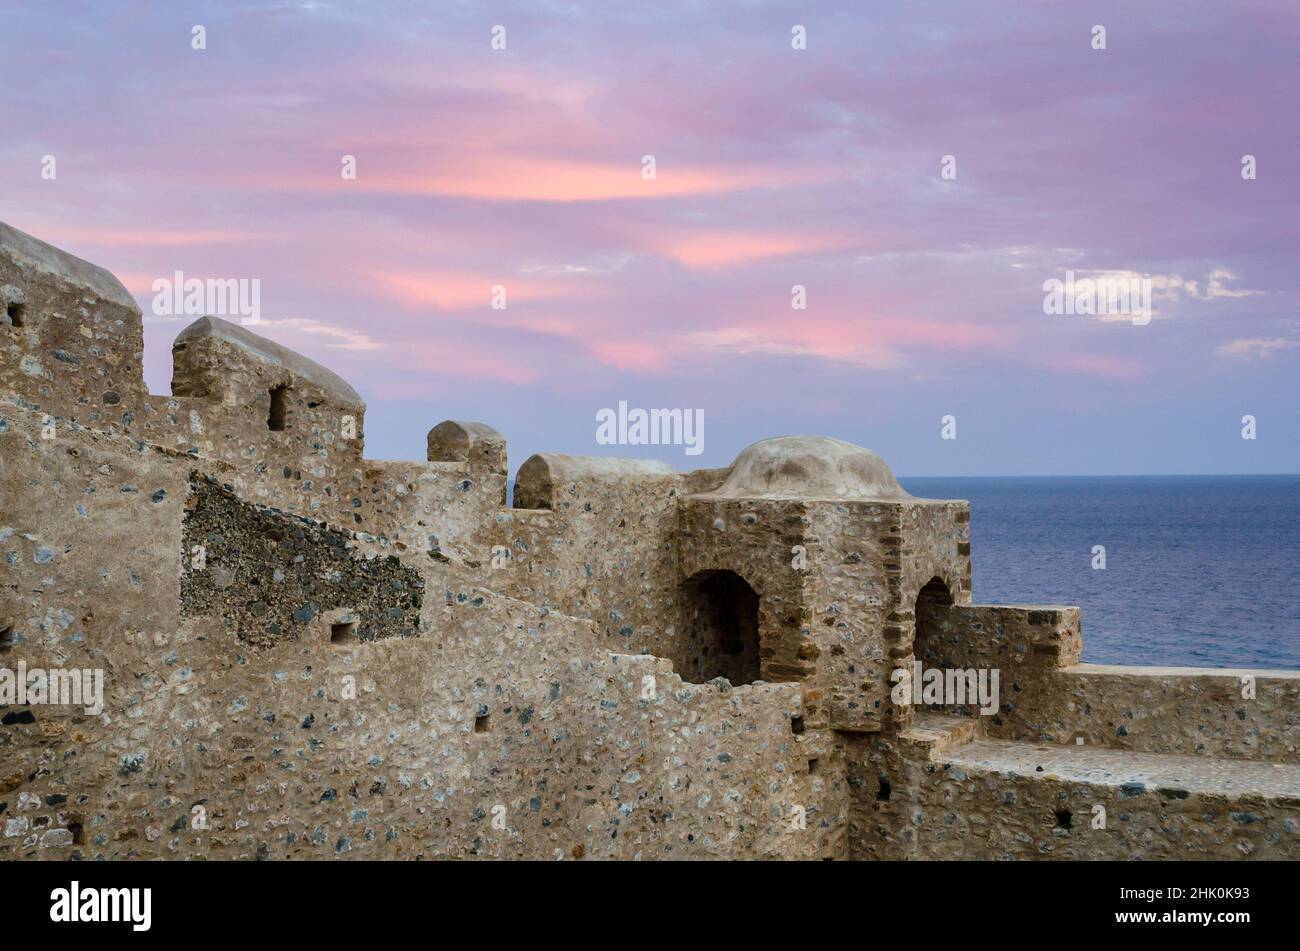 Defensive Walls in Monemvasia Island, Peloponnese, Greece at Sunset. Medieval Castle Town Ends by the Sea. Stock Photo